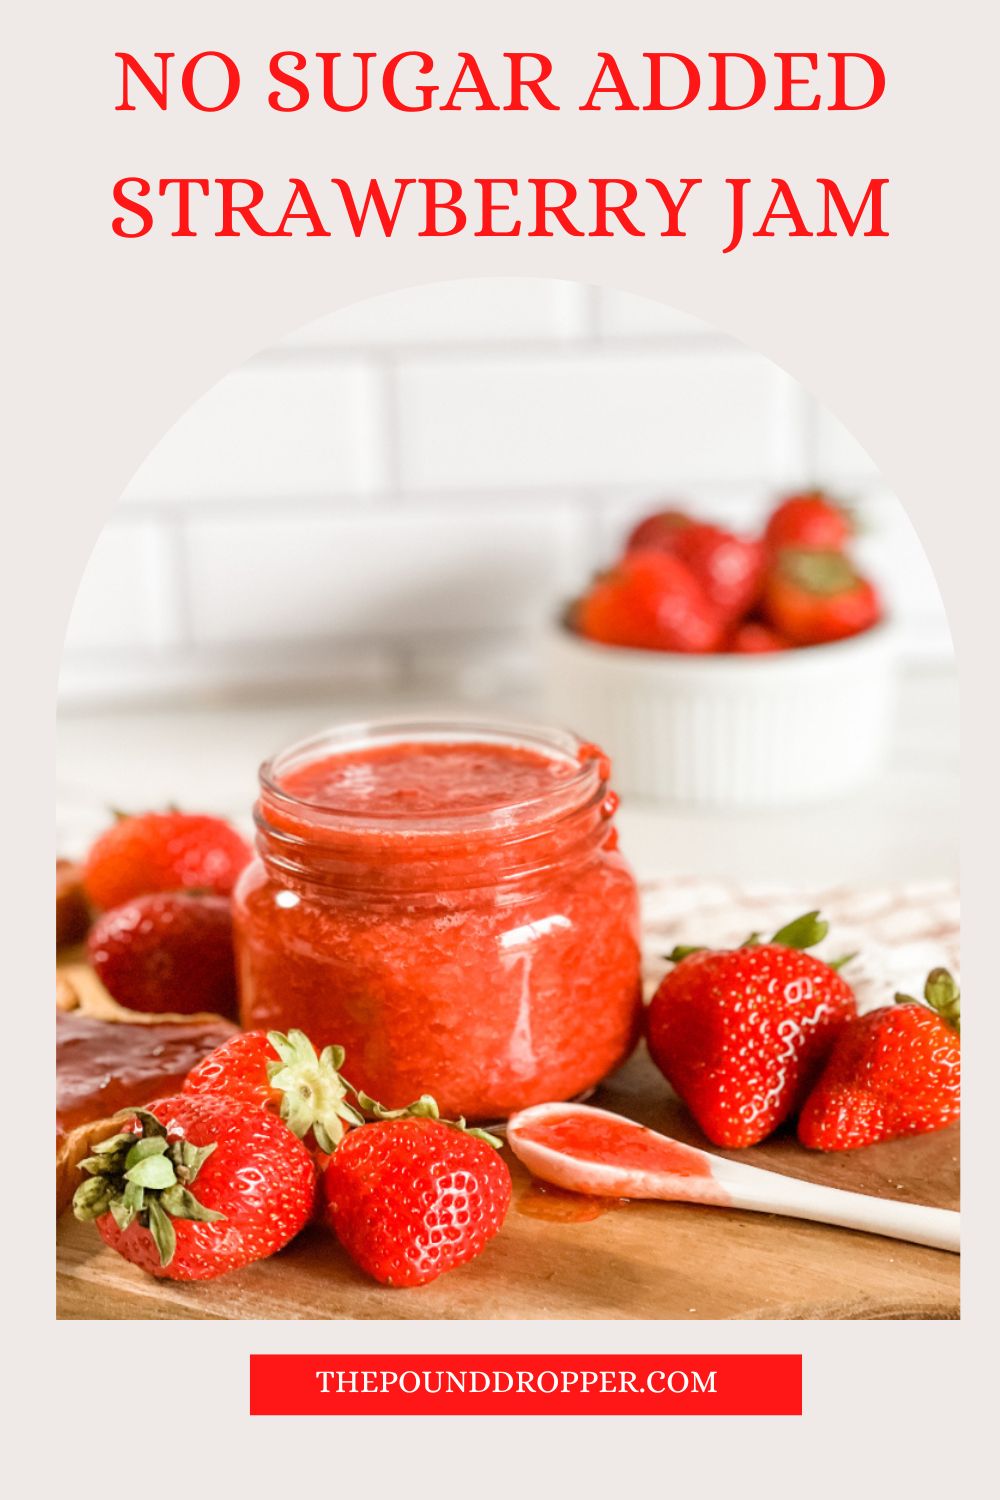 This No Sugar Added Strawberry Jam recipe is simple to make and uses fresh or frozen strawberries-making it so fresh and flavorful. This strawberry jam is made WITHOUT pectin and requires only 3 ingredients! This is the perfect topping for waffles, pancakes, yogurt, oatmeal, toast. It's also very tasty when you put it into muffin batter! via @pounddropper